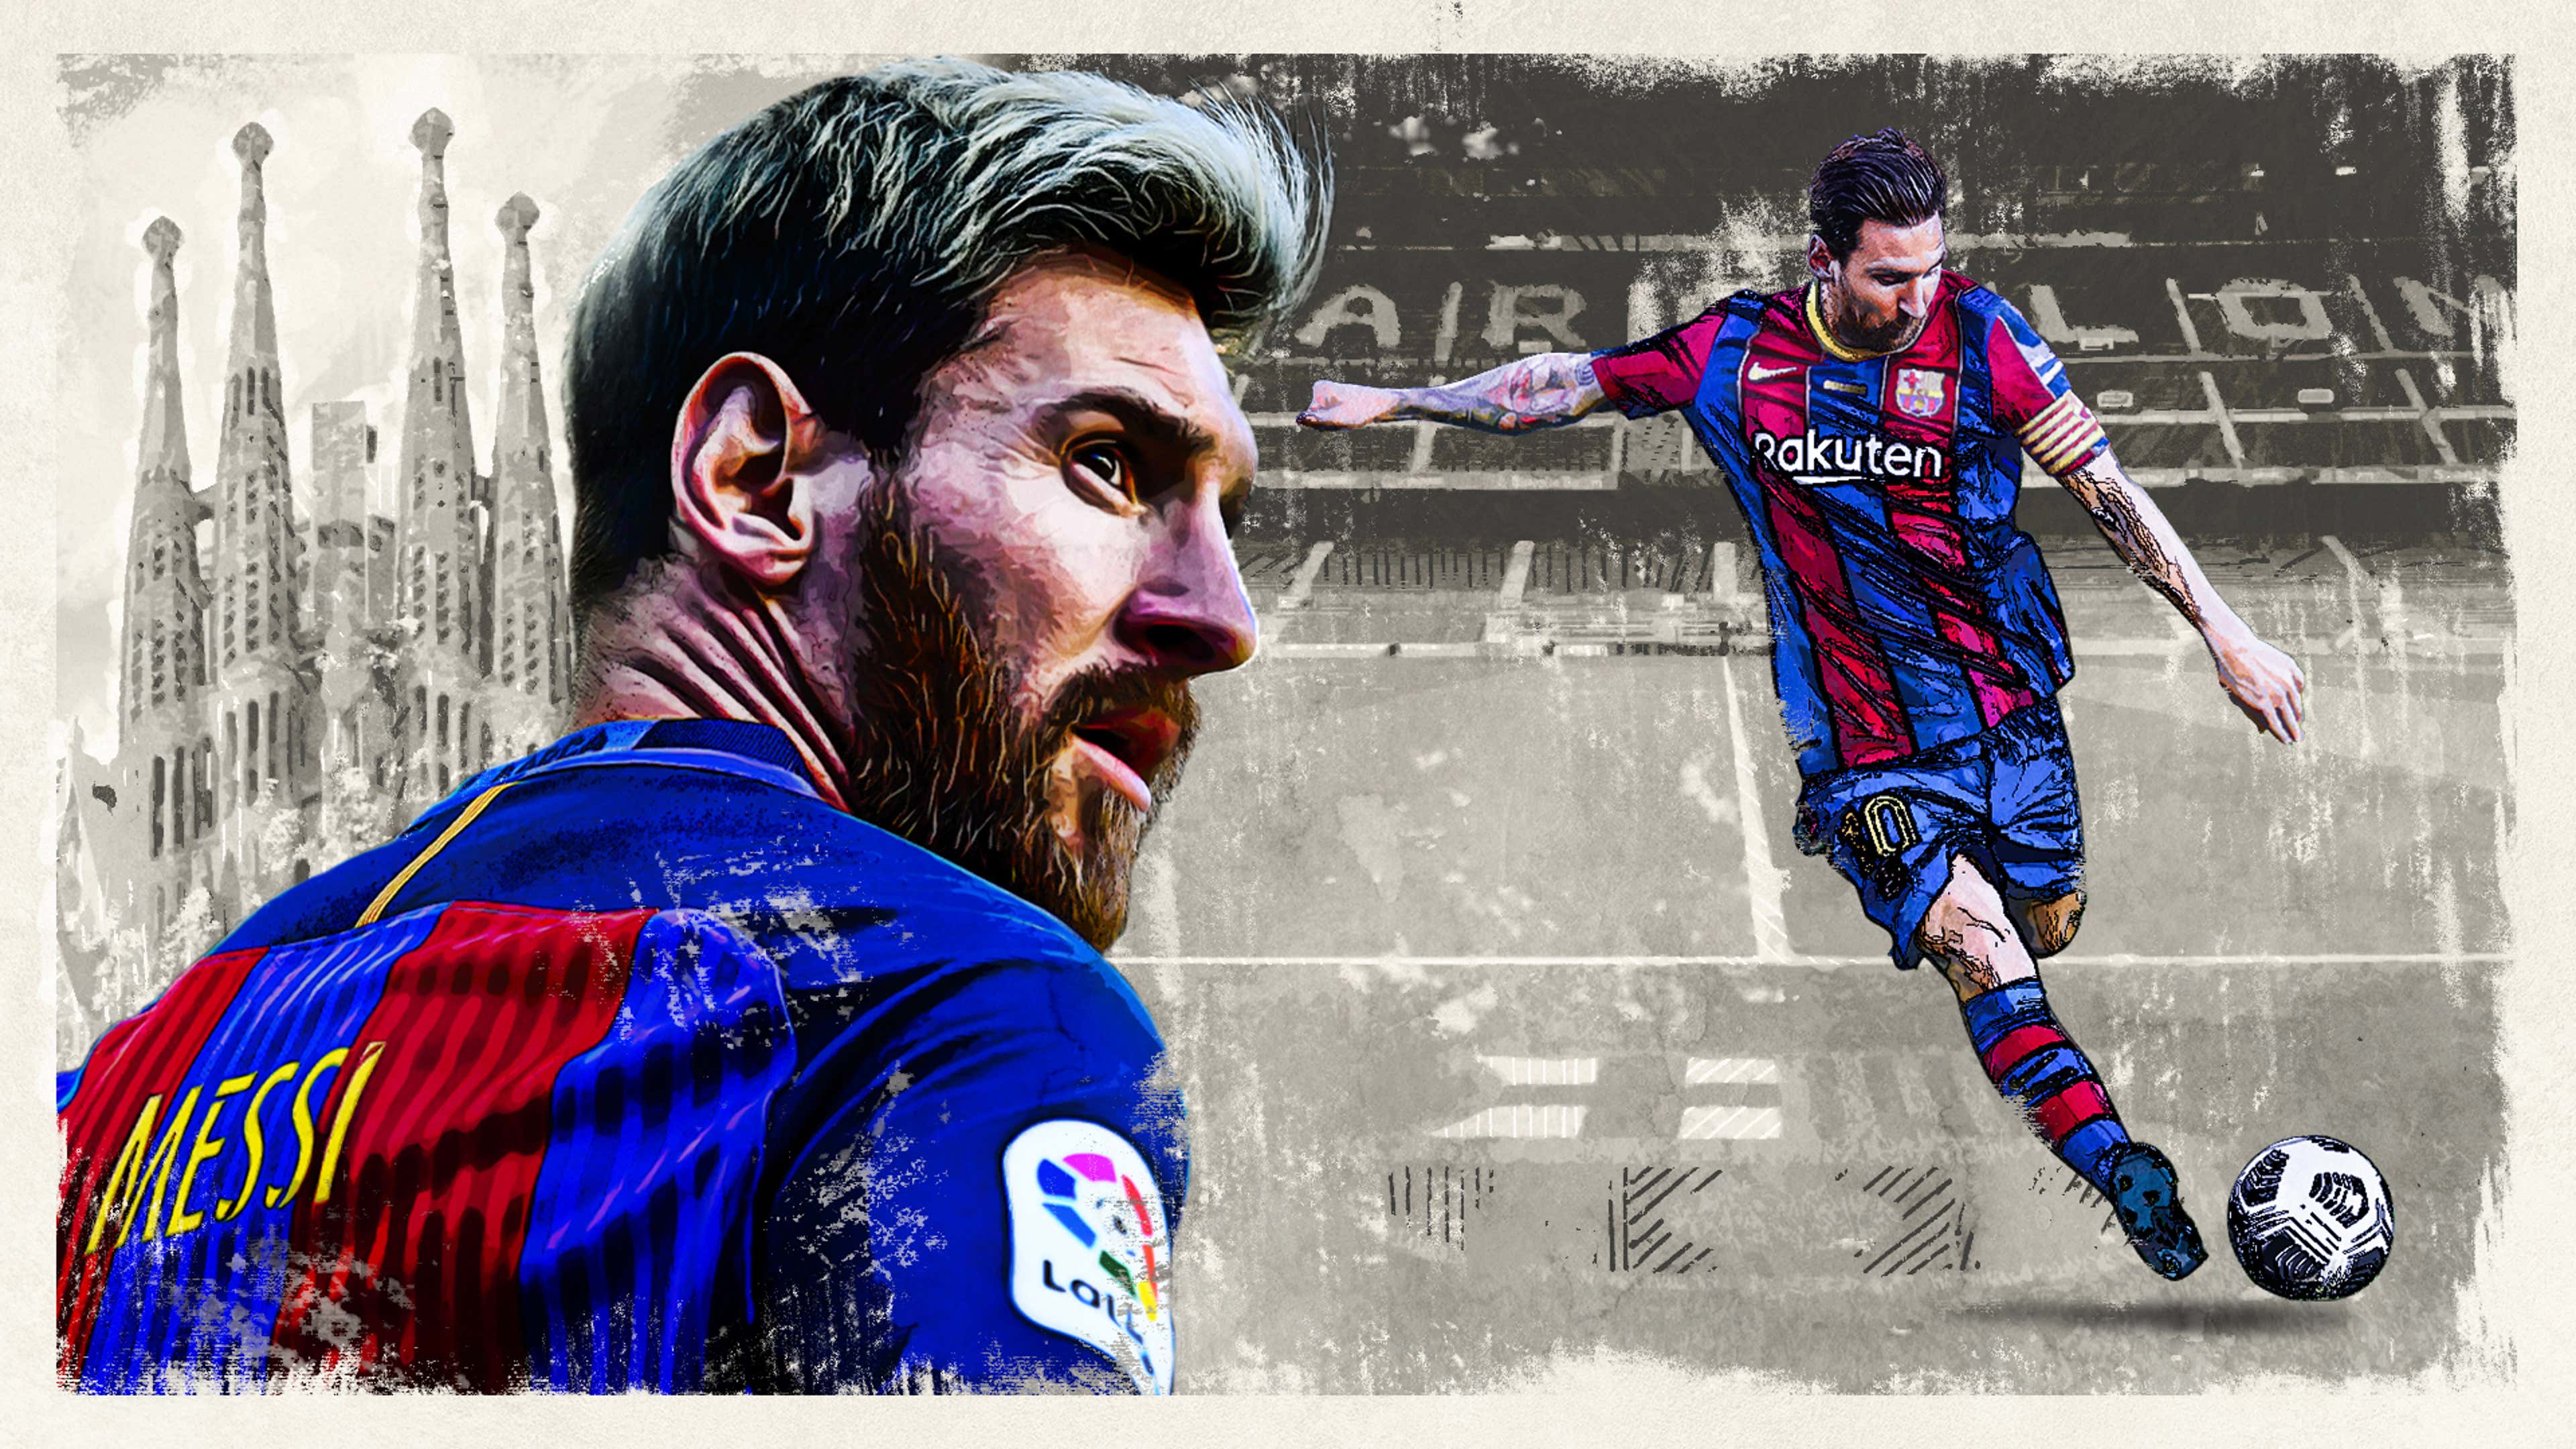 Lionel Messi: The legend looking for a new record in the World 11